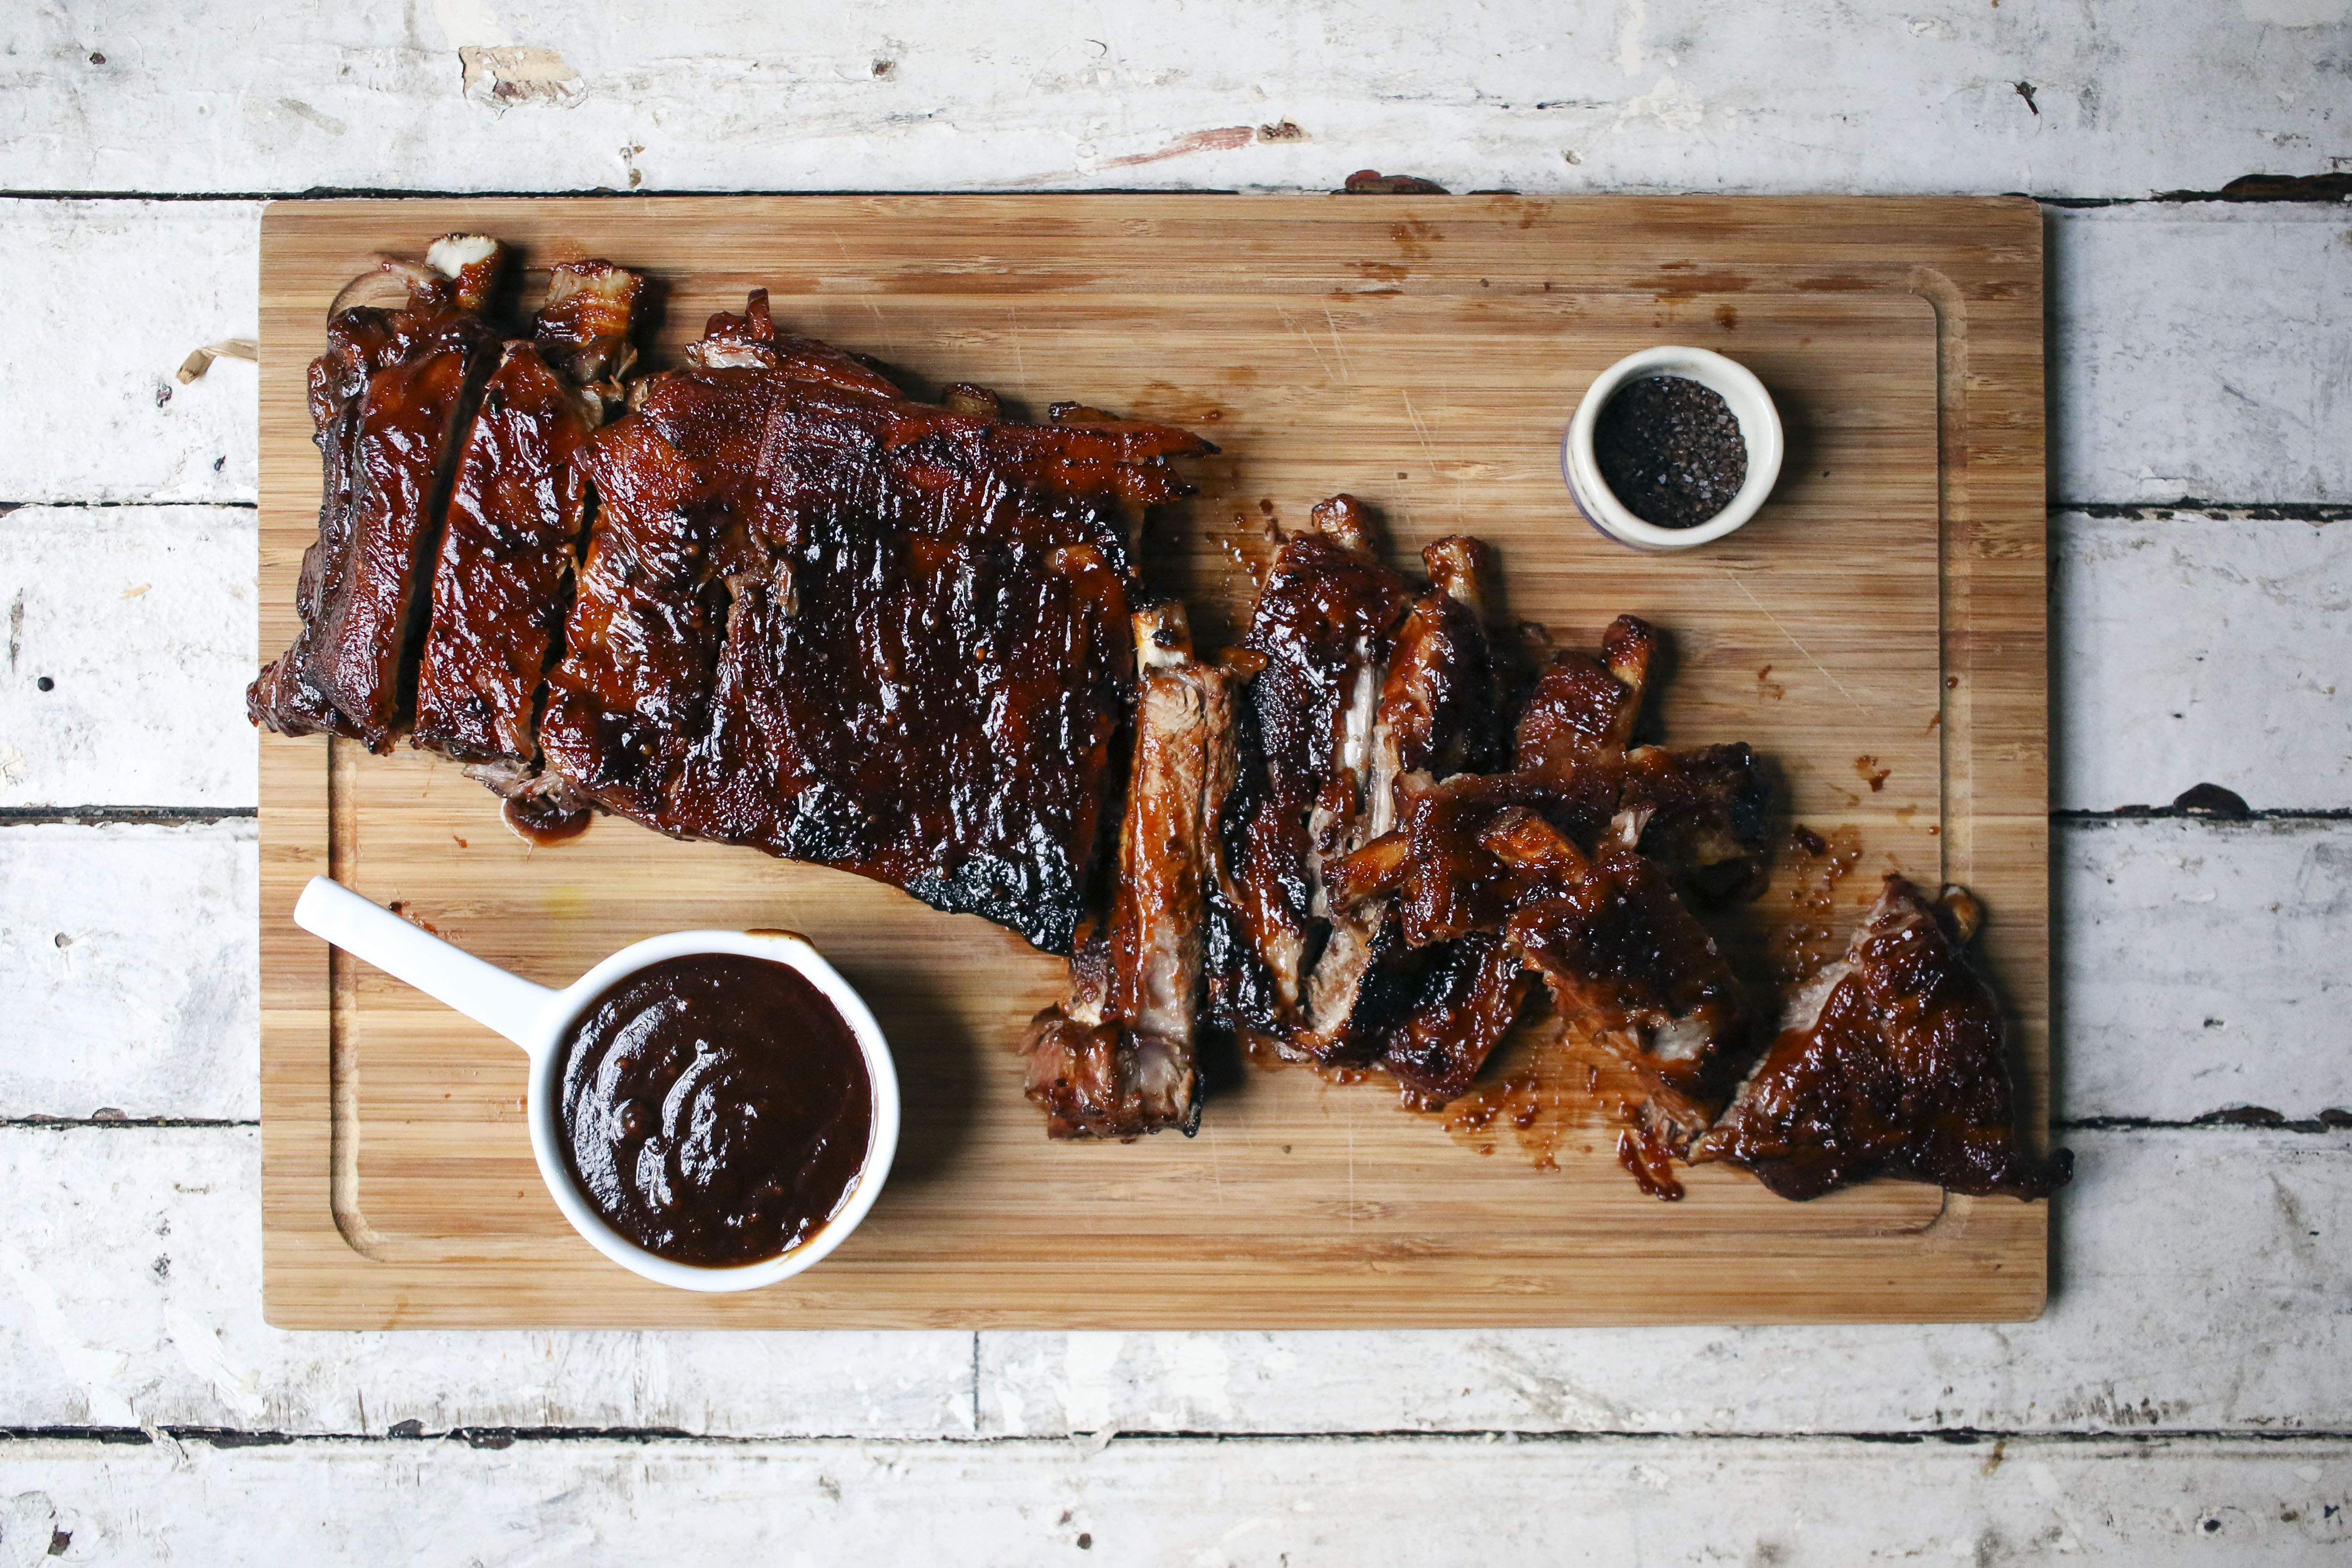 Pomegranate Molasses BBQ Ribs with Smoked Sea Salt | I Will Not Eat Oysters